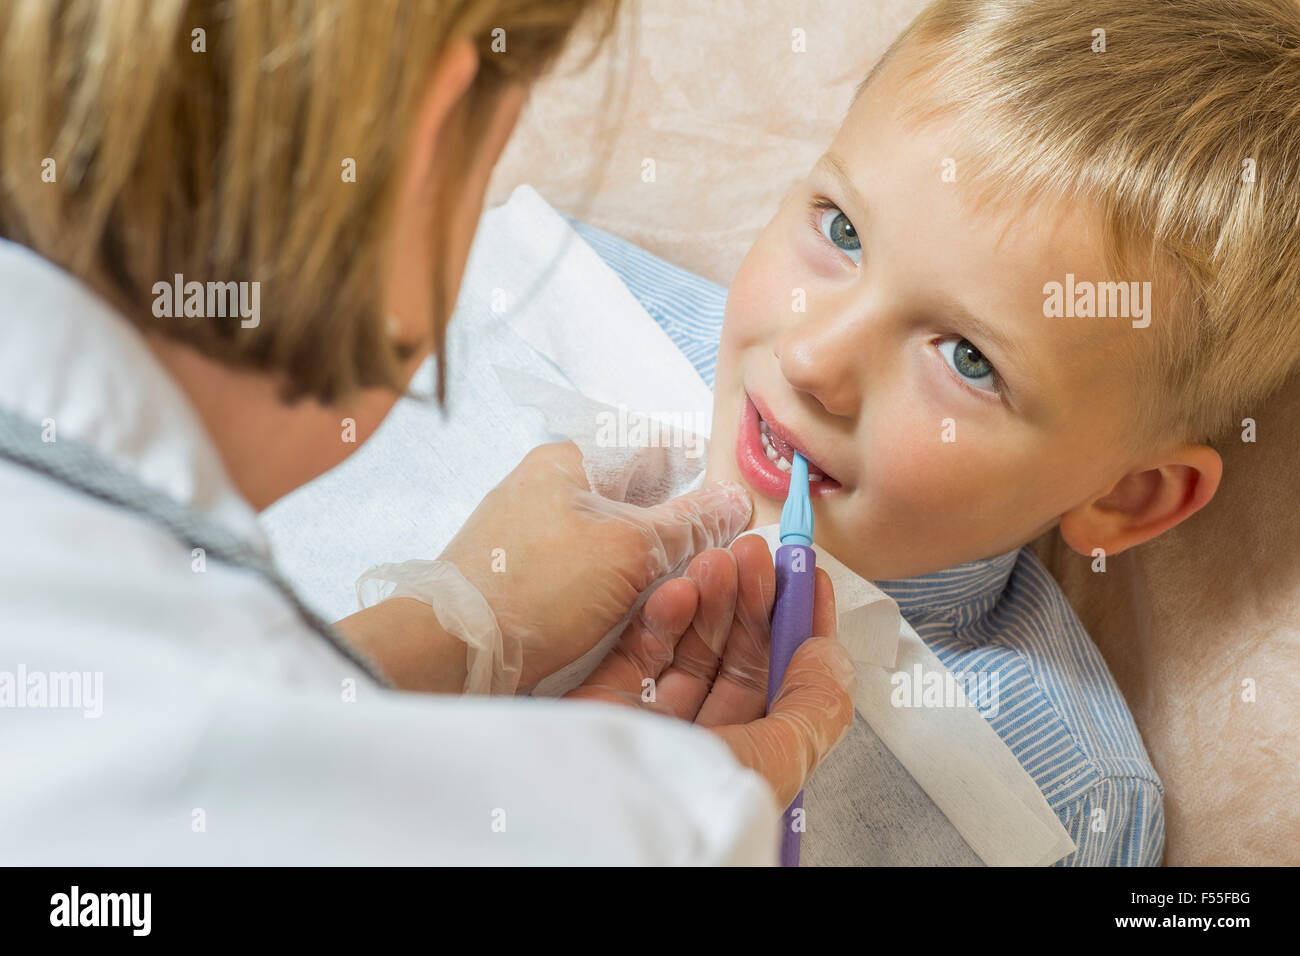 High angle view of speech therapist treating a boy Stock Photo